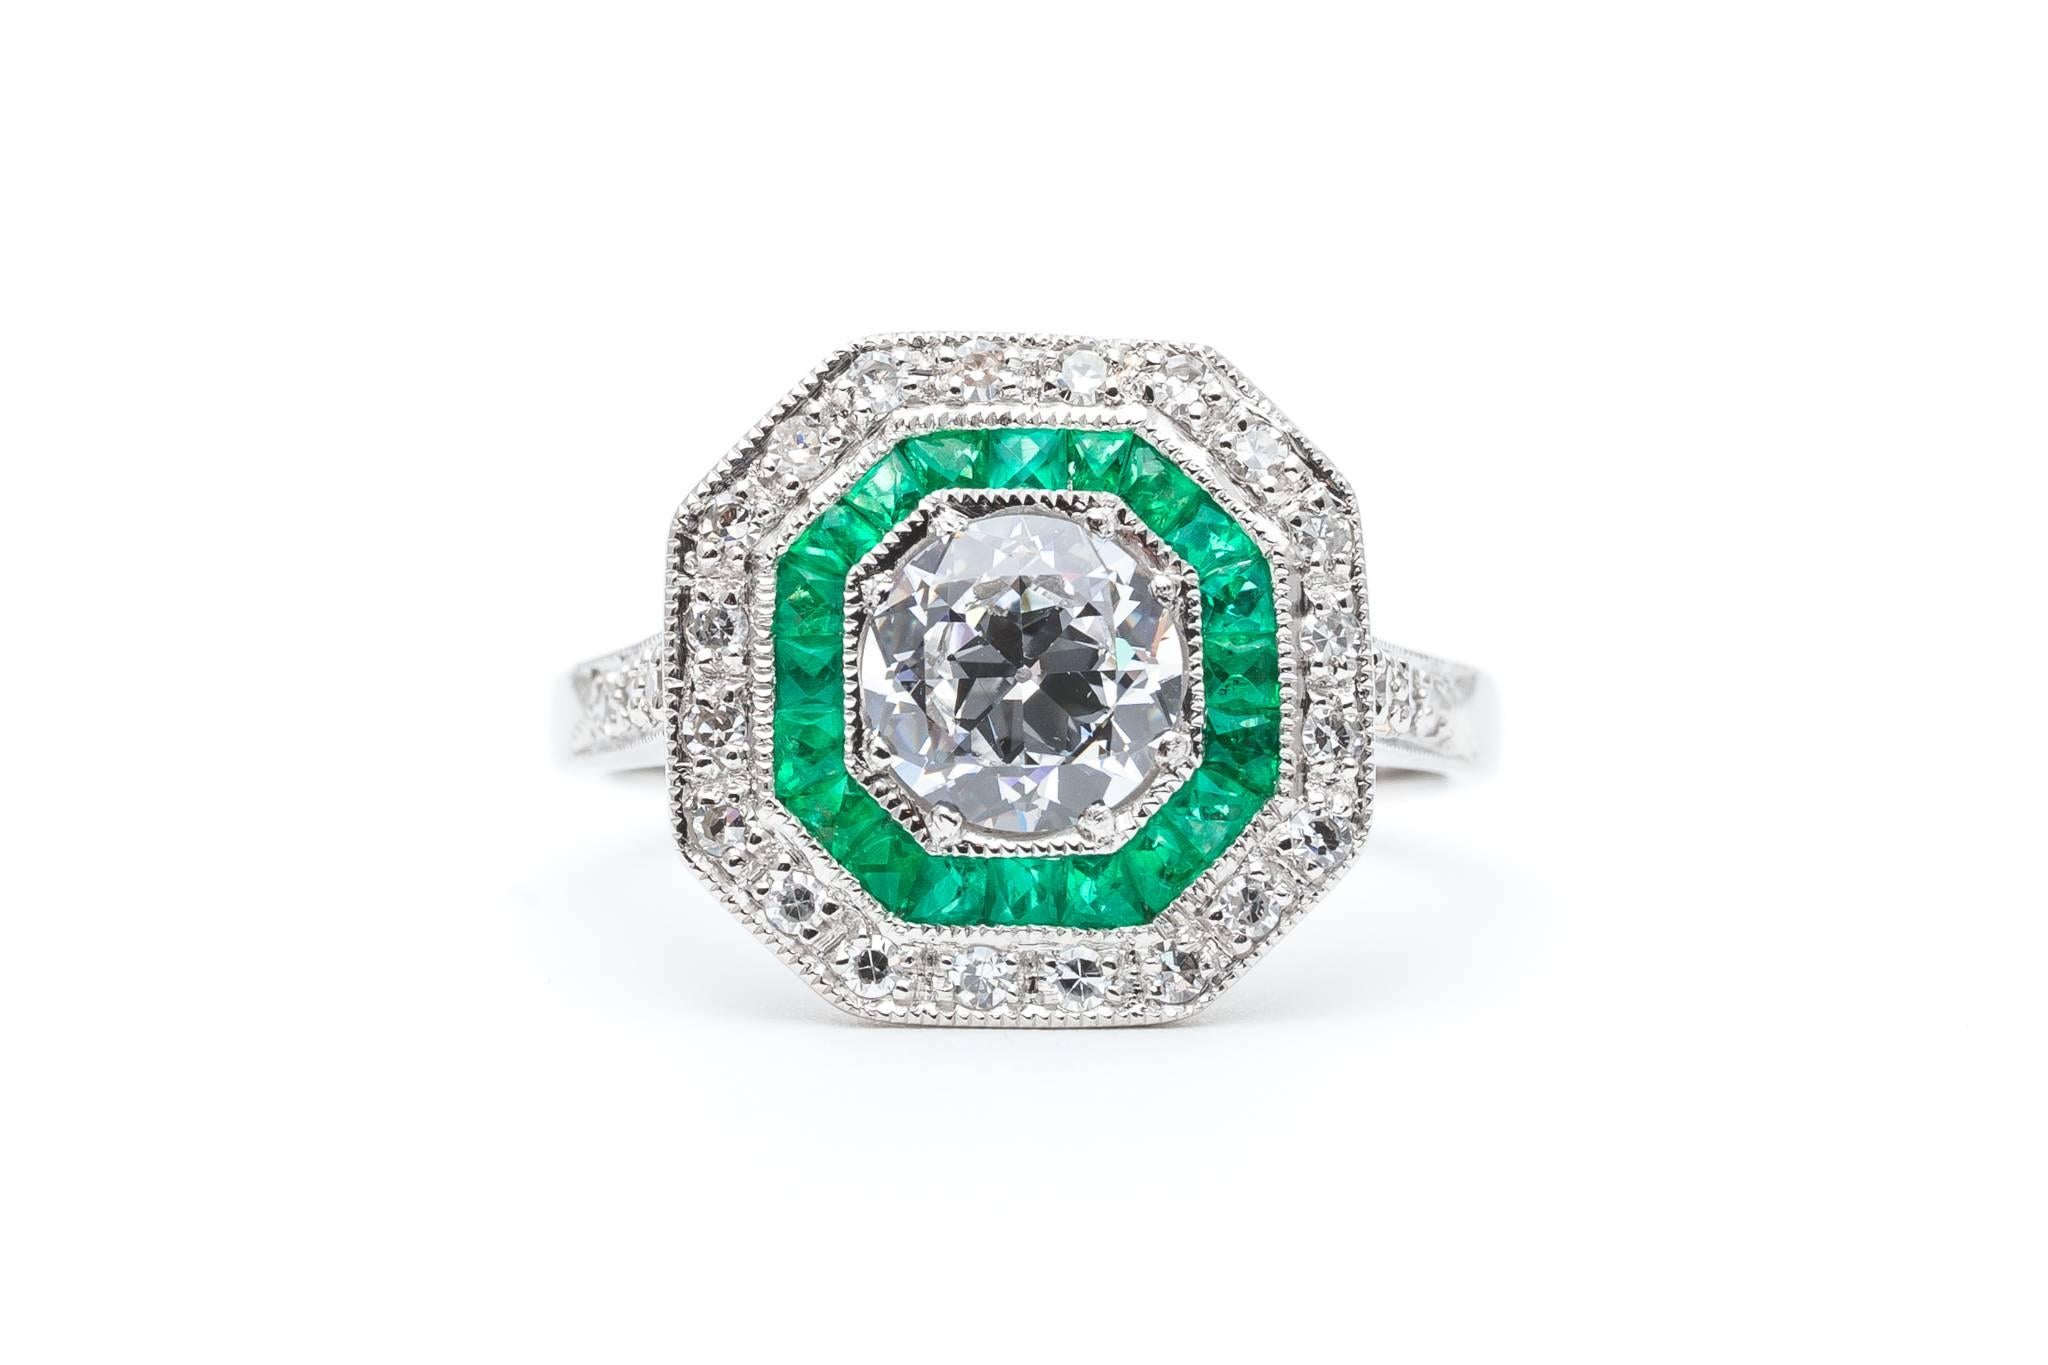 An exceptionally beautiful emerald and diamond ring in luxurious platinum. Featuring beautiful French cut Colombian emeralds, sparkling single cut and antique mine cut diamonds, and hand applied mille grain beading, this ring is a truly stunning